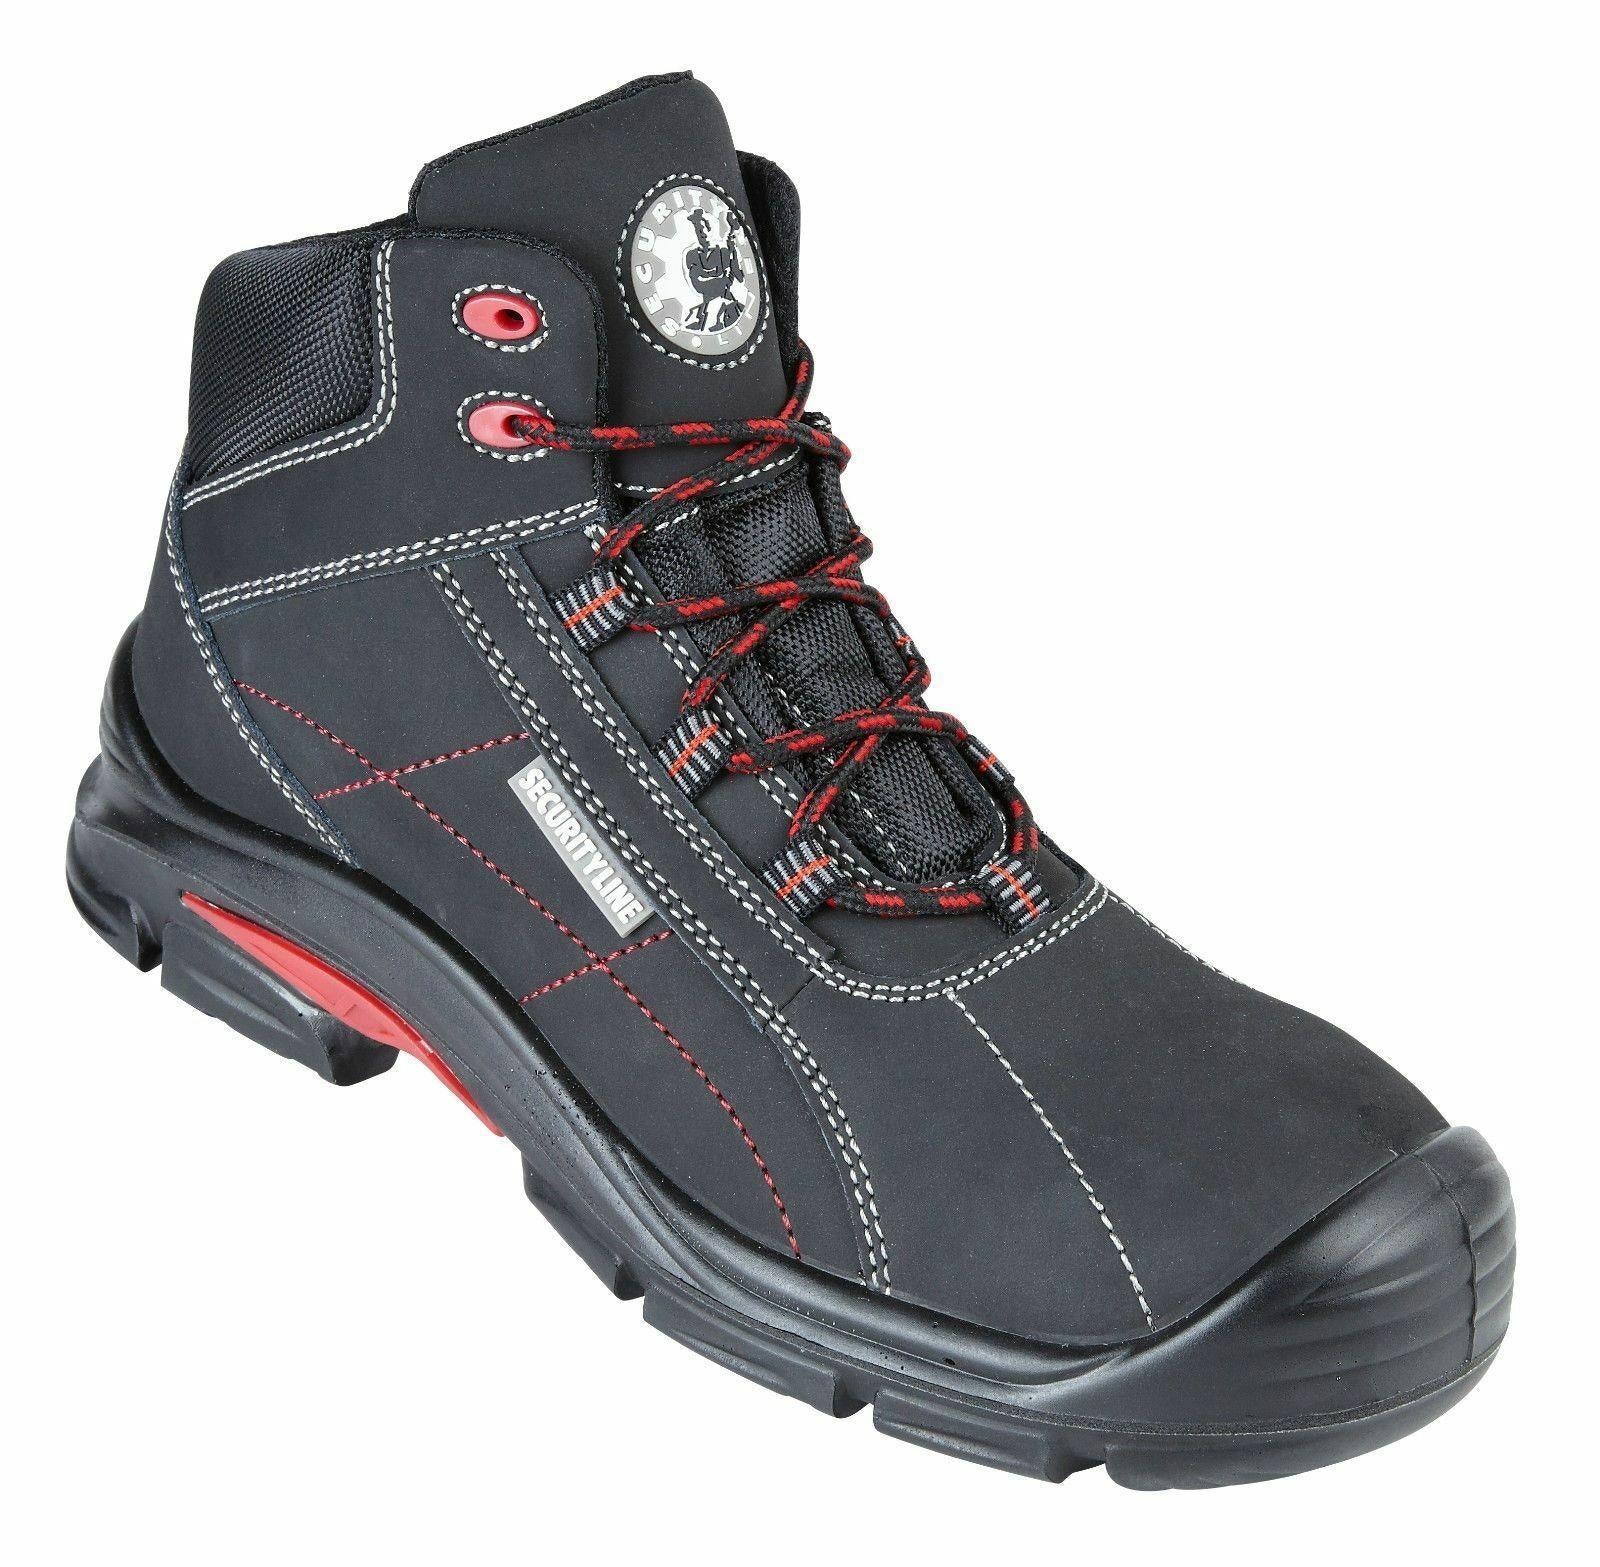 Himalayan Buteo S3 black metal-free composite toe/midsole safety boot #4211